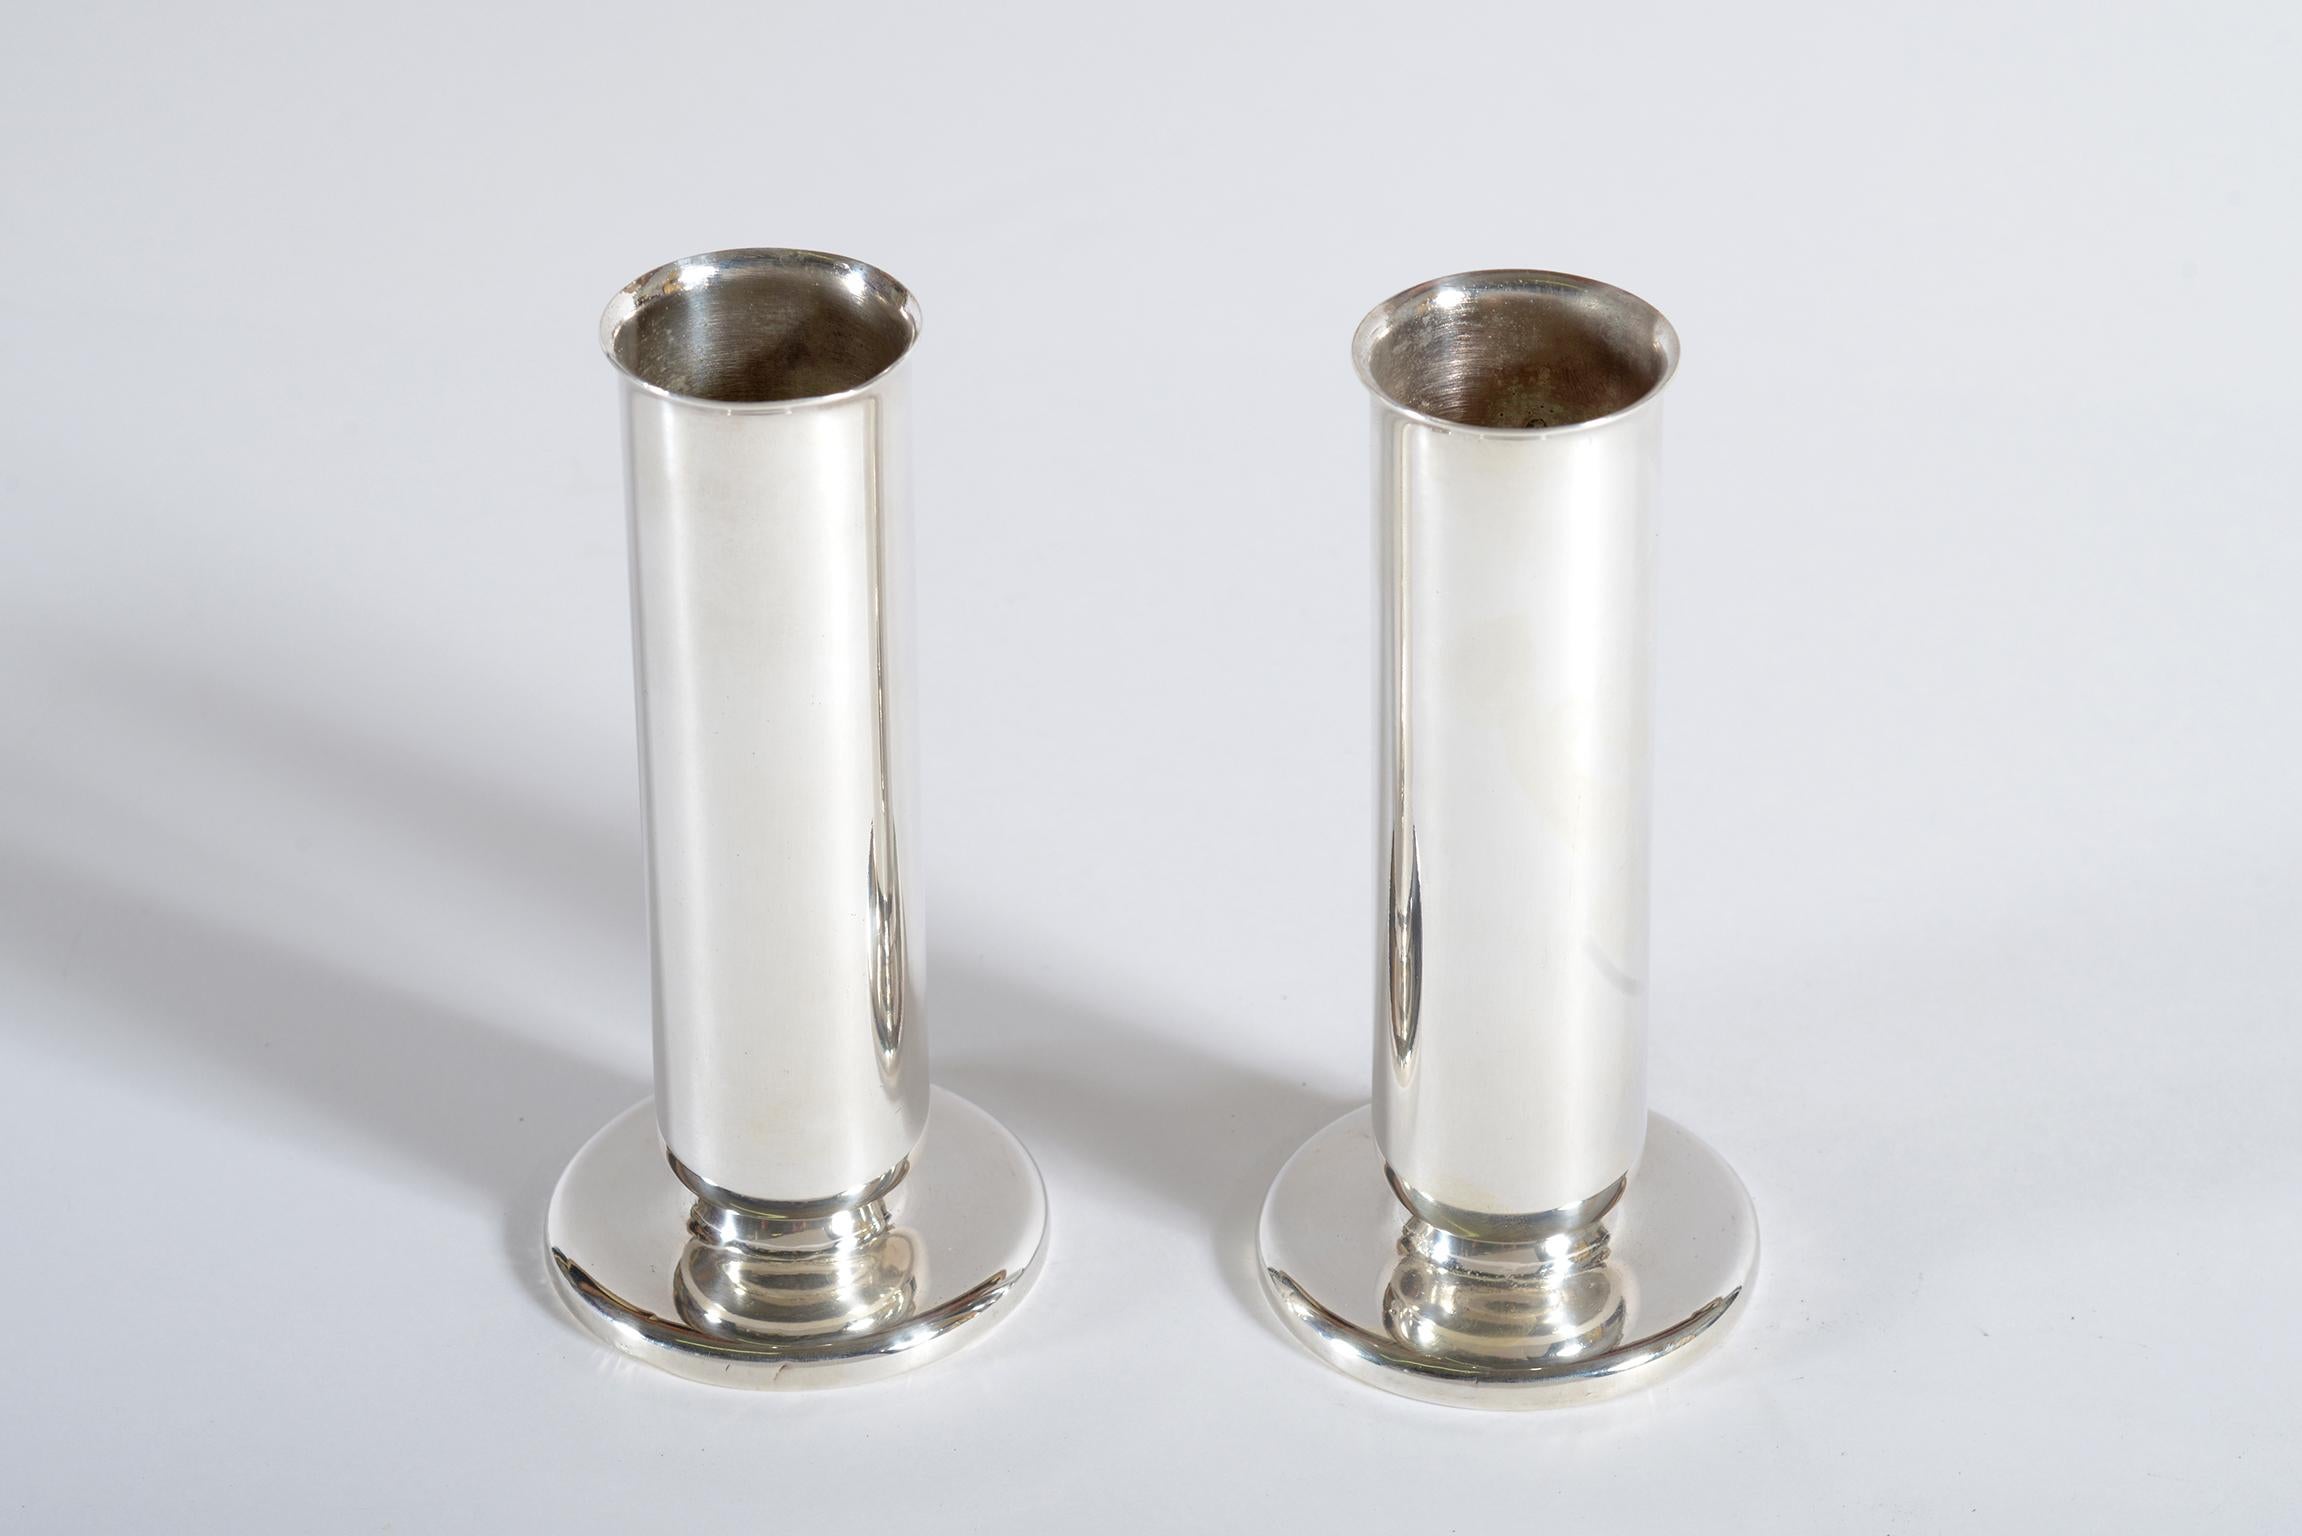 Gio Ponti pair of vases or candlesticks designed in the 1930s and executed by Krupp Milano in silvered Alpacca.
The simple and elegant cylindrical shape exemplifies the research that Gio Ponti undertook in his work for Arthur Krupp starting from